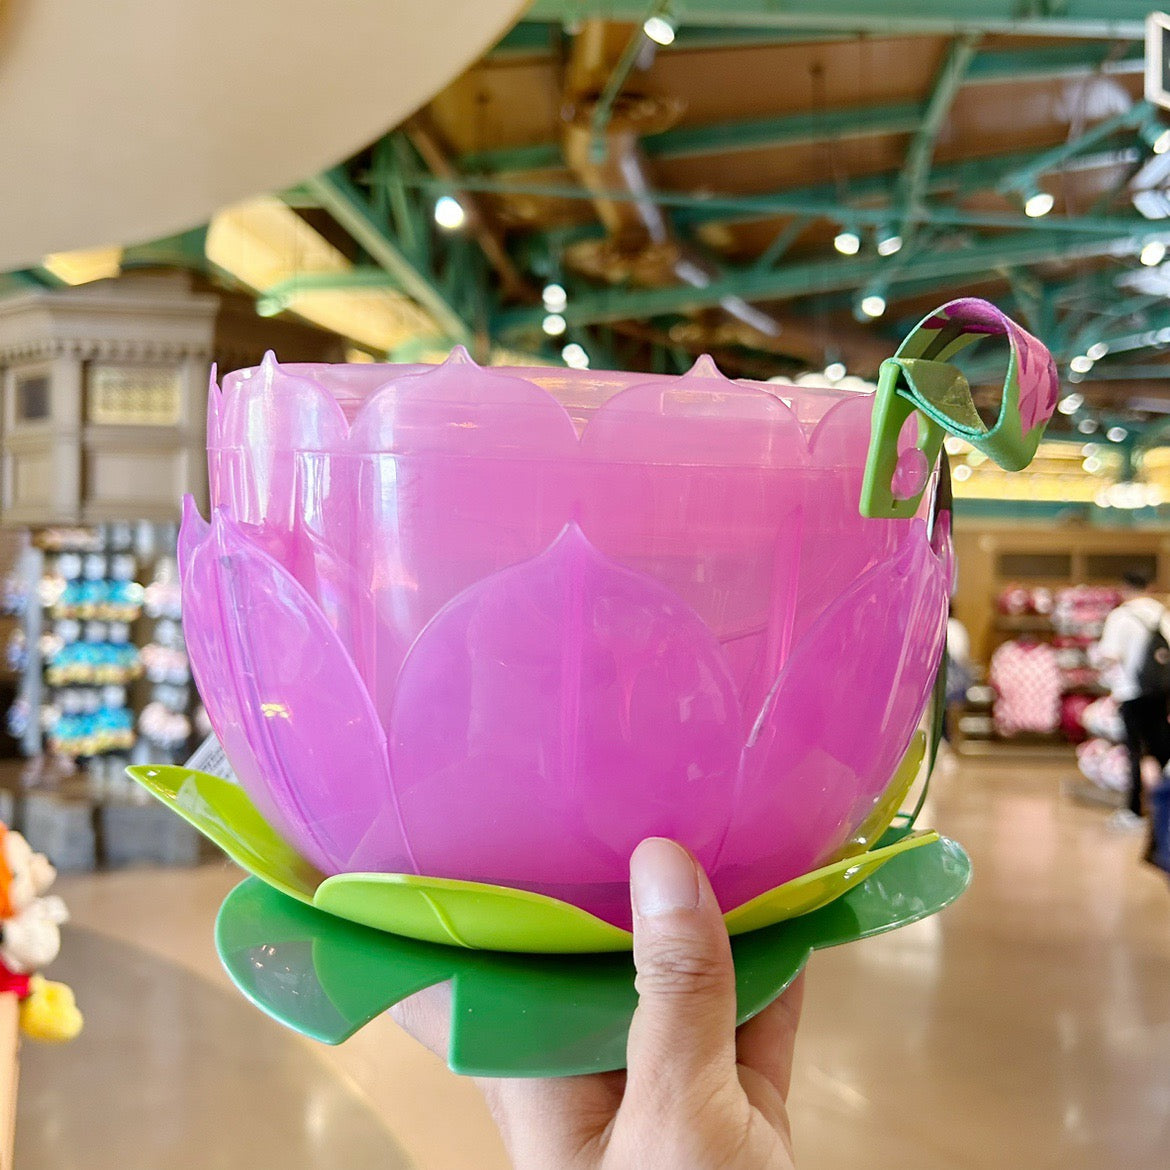 Disney Park Avatar The Way Of Water Lotus Light Up Popcorn Bucket Container